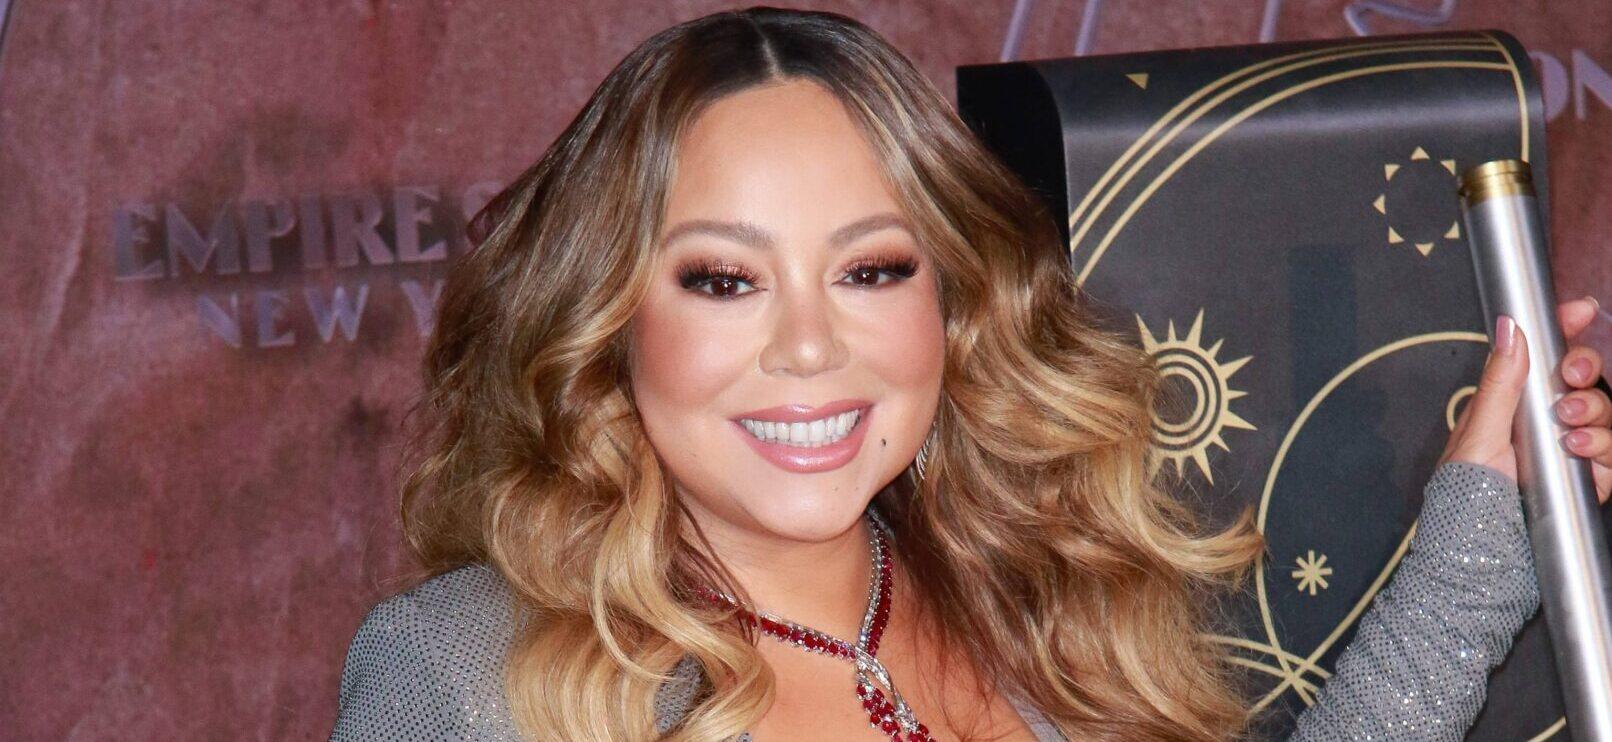 Mariah Carey participates in the ceremonial lighting of the Empire State Building in NYC